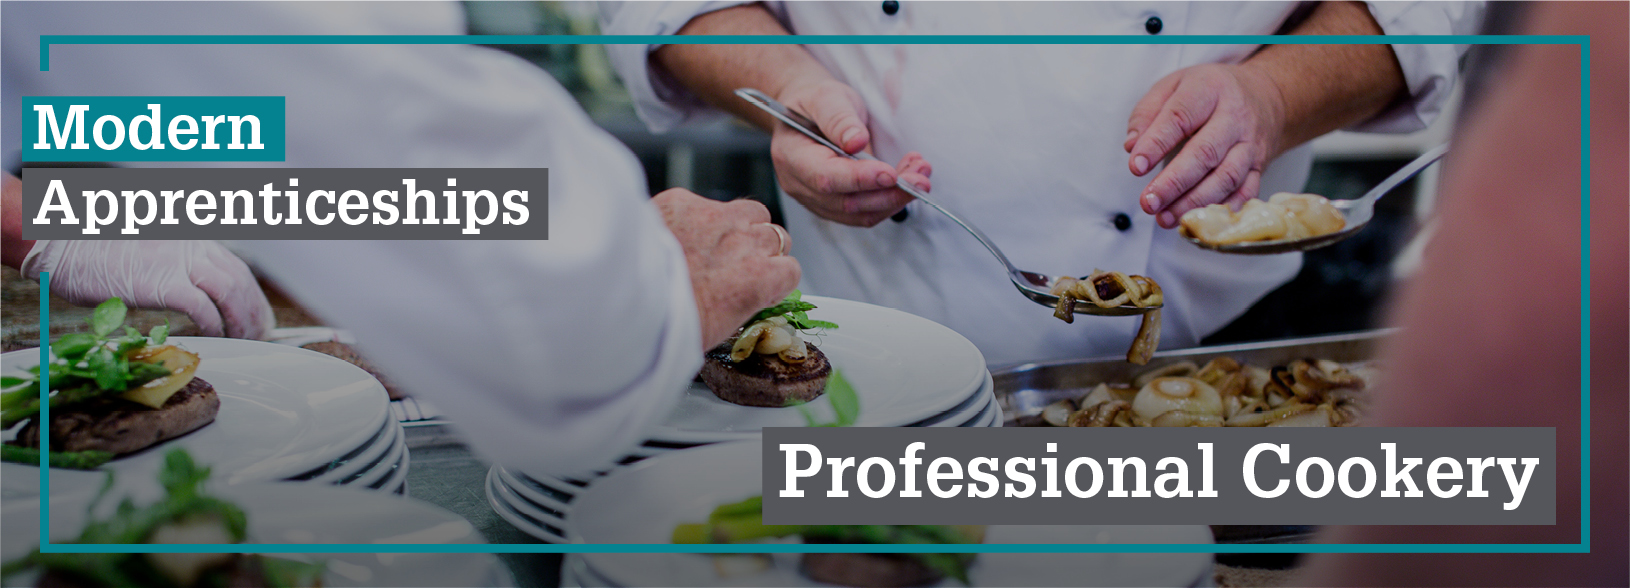 Modern Apprenticeship in Professional Cookery